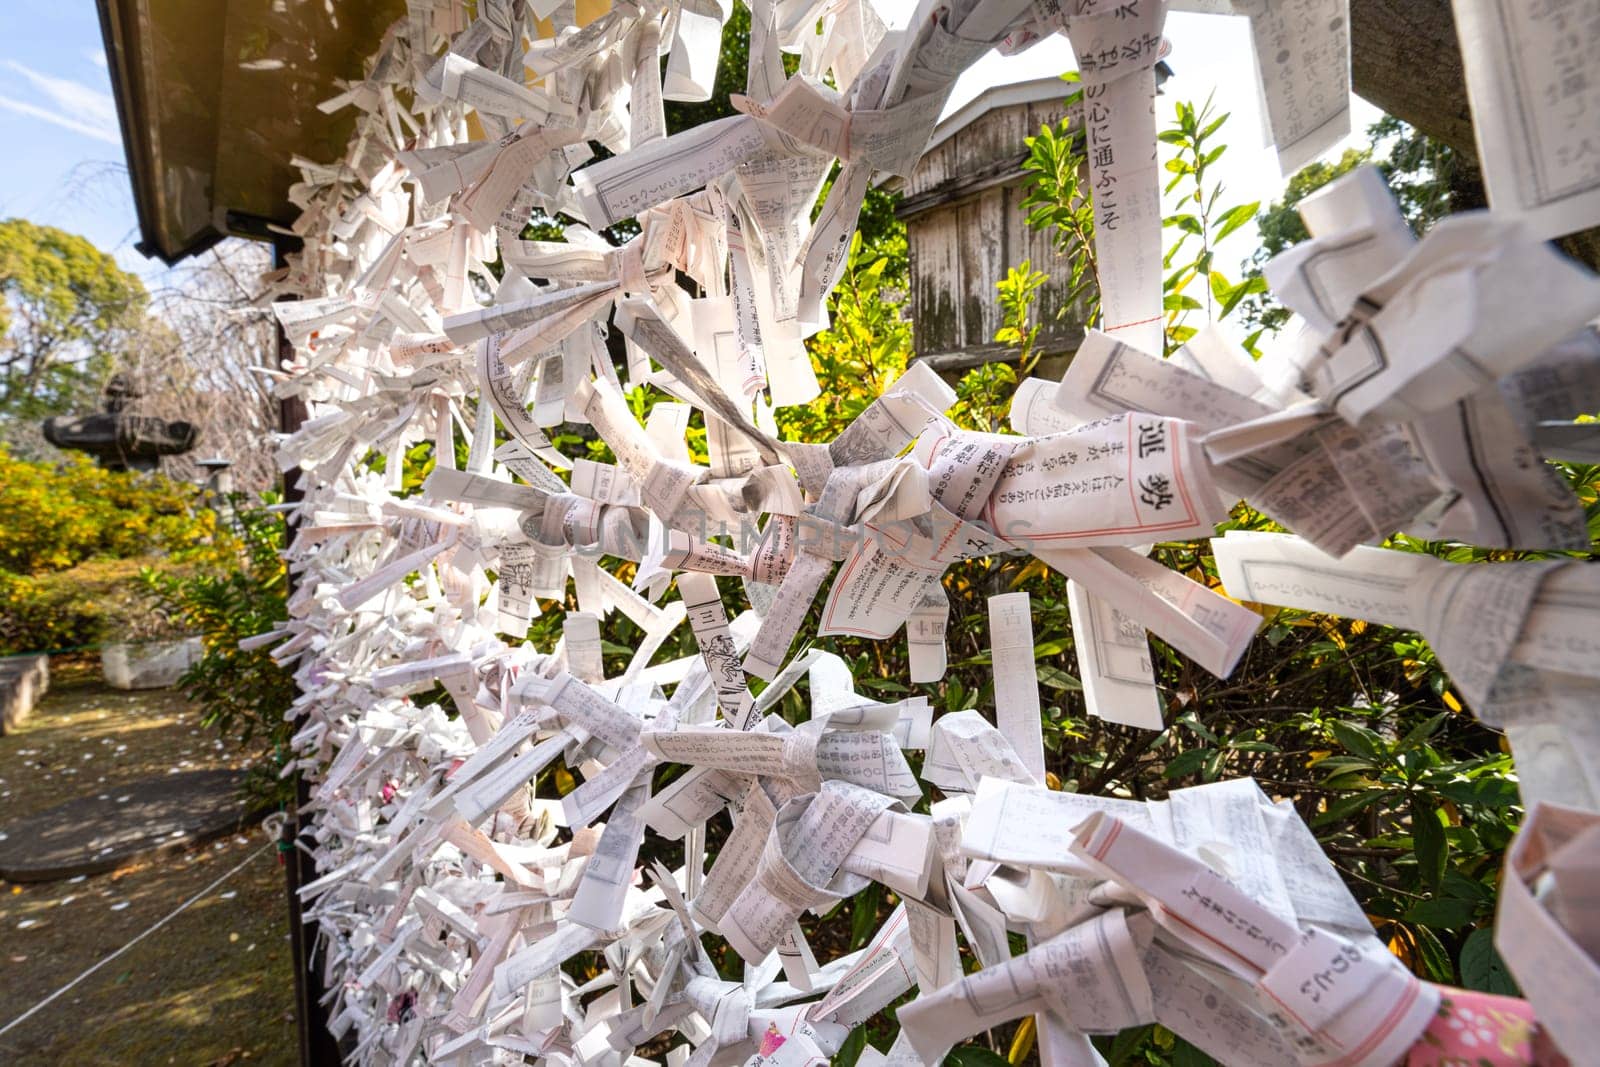 the Omikuji sheets that predict one's future outside a temple in Tokyo, Japan by sergiodv